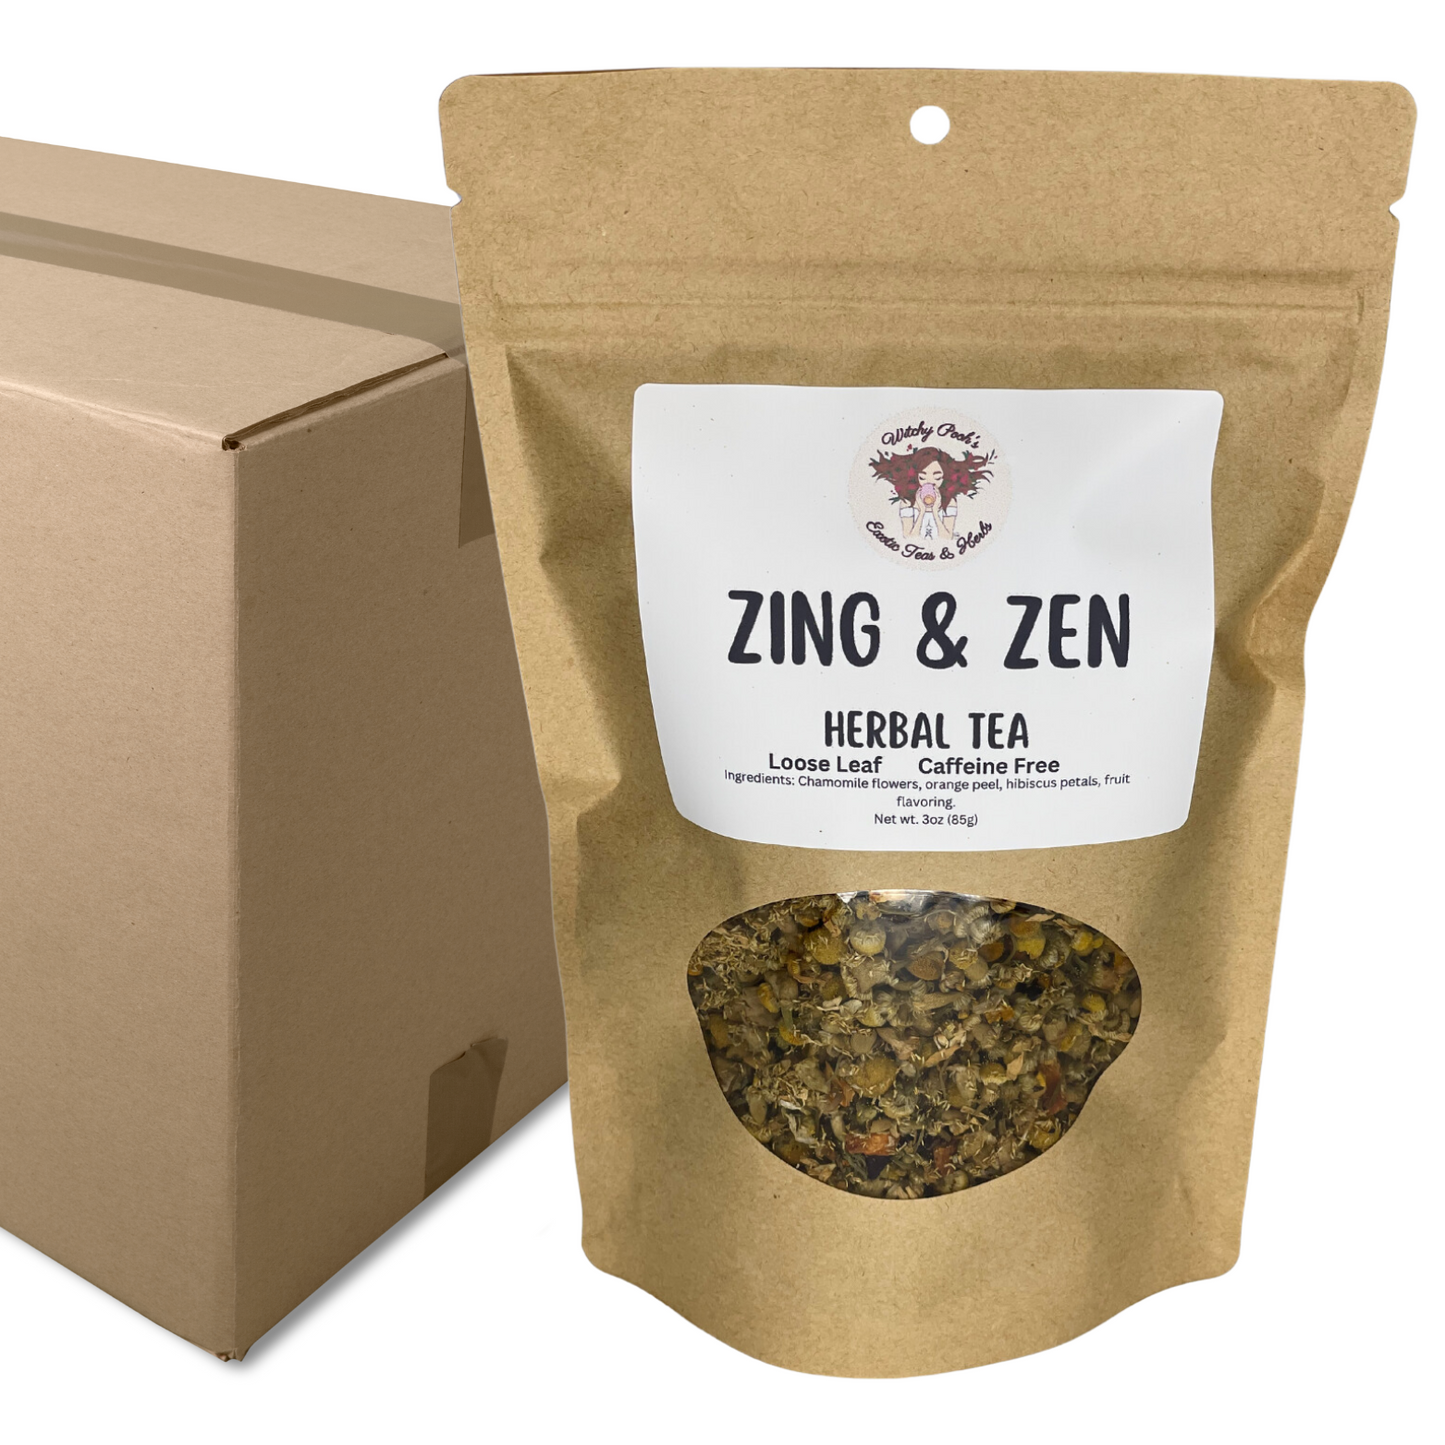 Witchy Pooh's Zing & Zen Loose Leaf Citrus Flavored Chamomile Herbal Tea, Caffeine Free-26